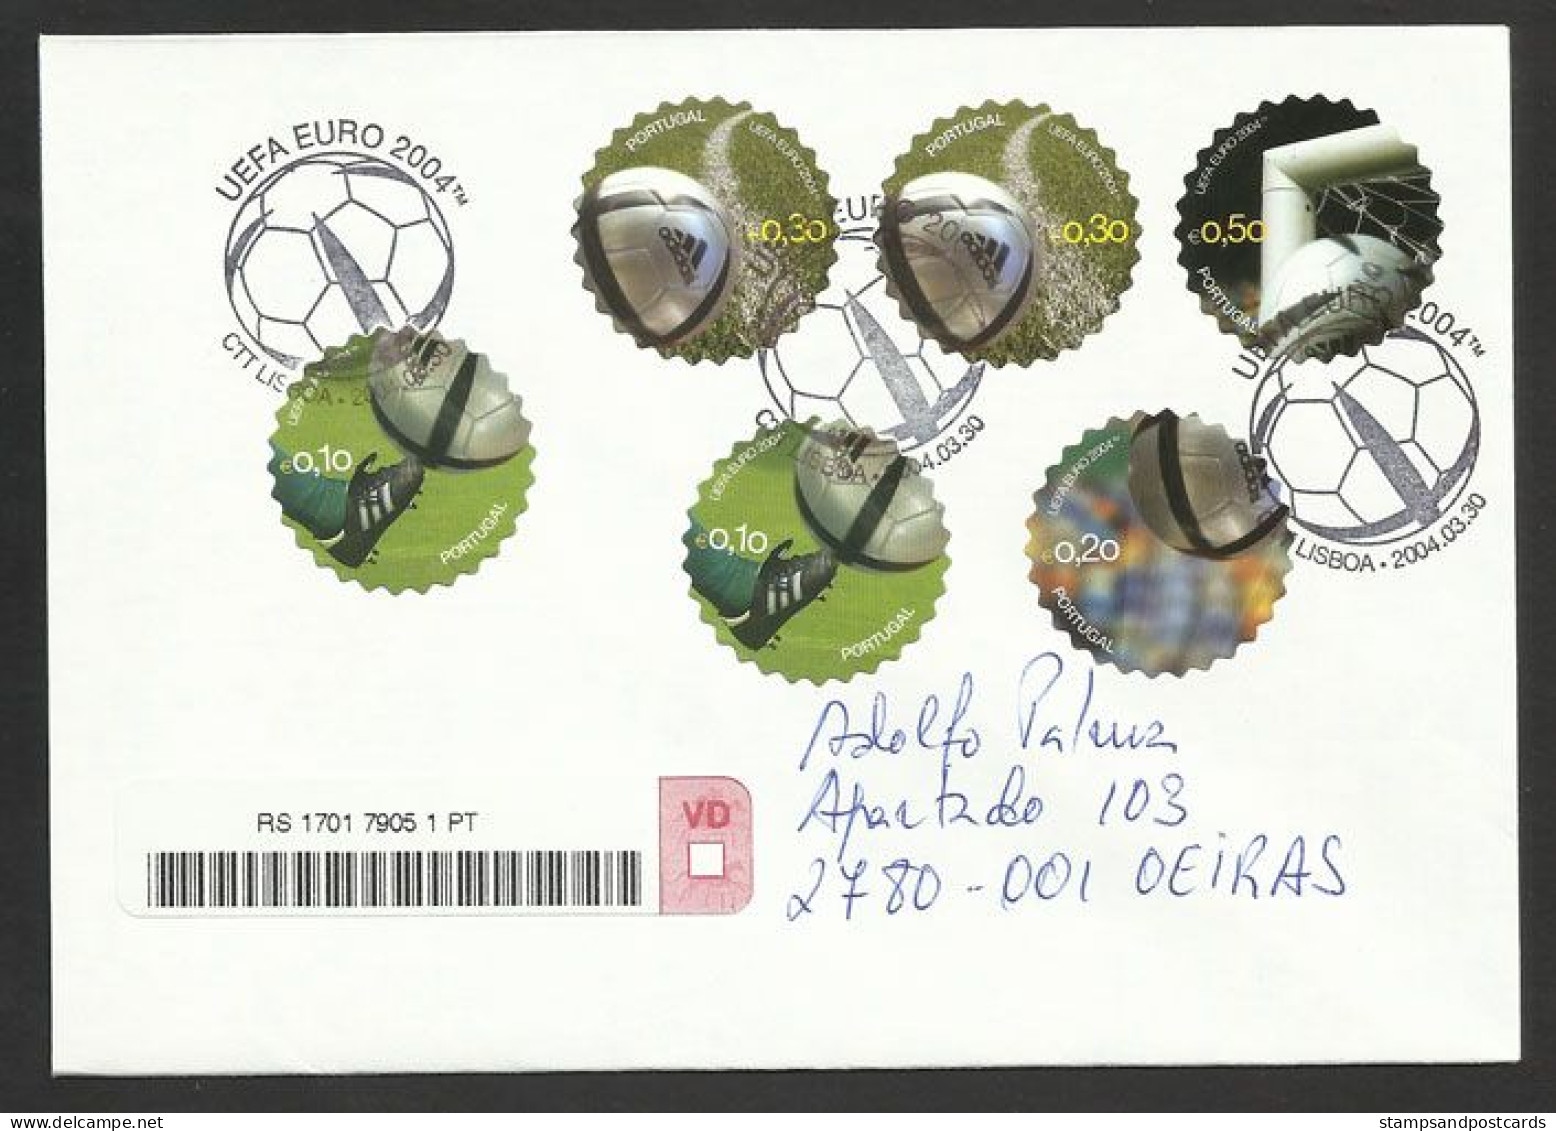 Portugal FDC Recommandée Football EURO 2004 Timbres Circulaires Autocollant Balle Adidas Soccer Round Stamps Ball R FDC - Championnat D'Europe (UEFA)